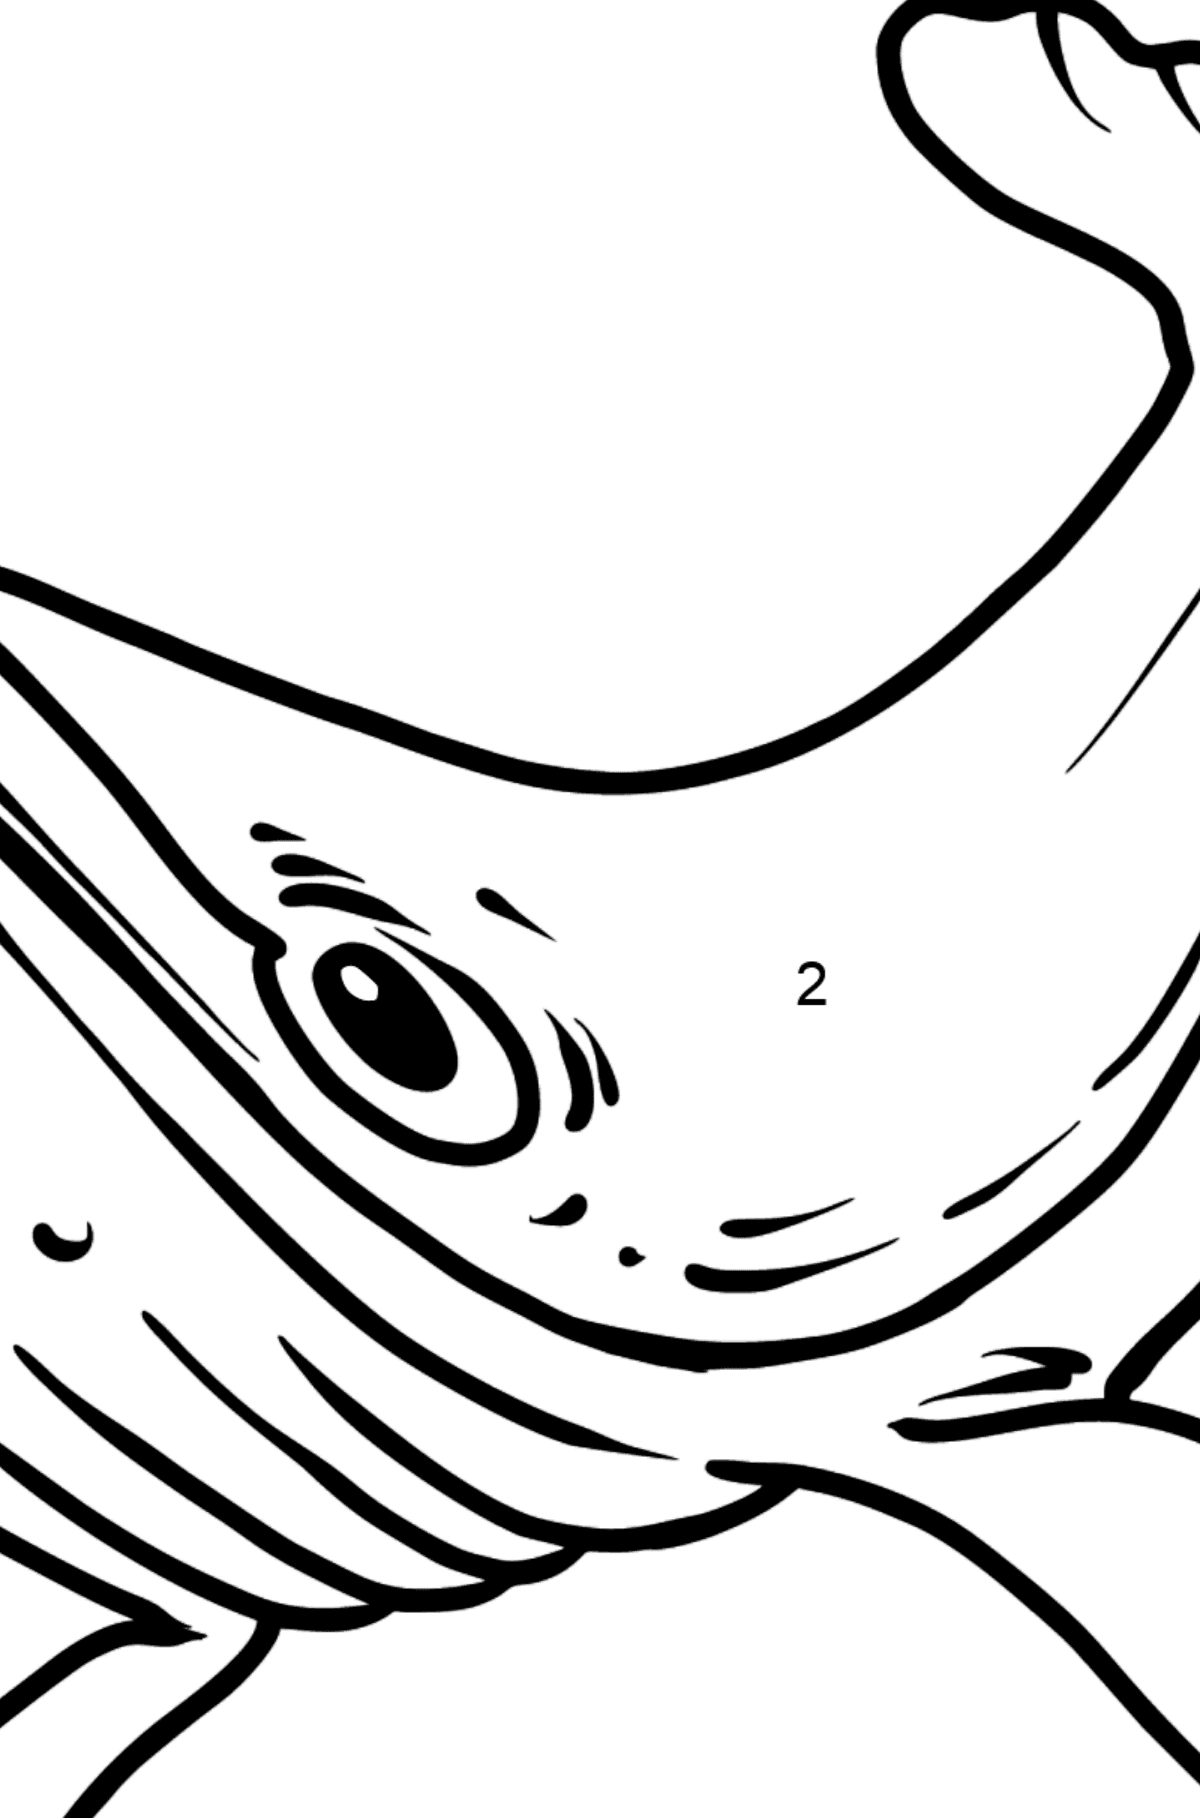 Whale coloring page - Coloring by Numbers for Kids